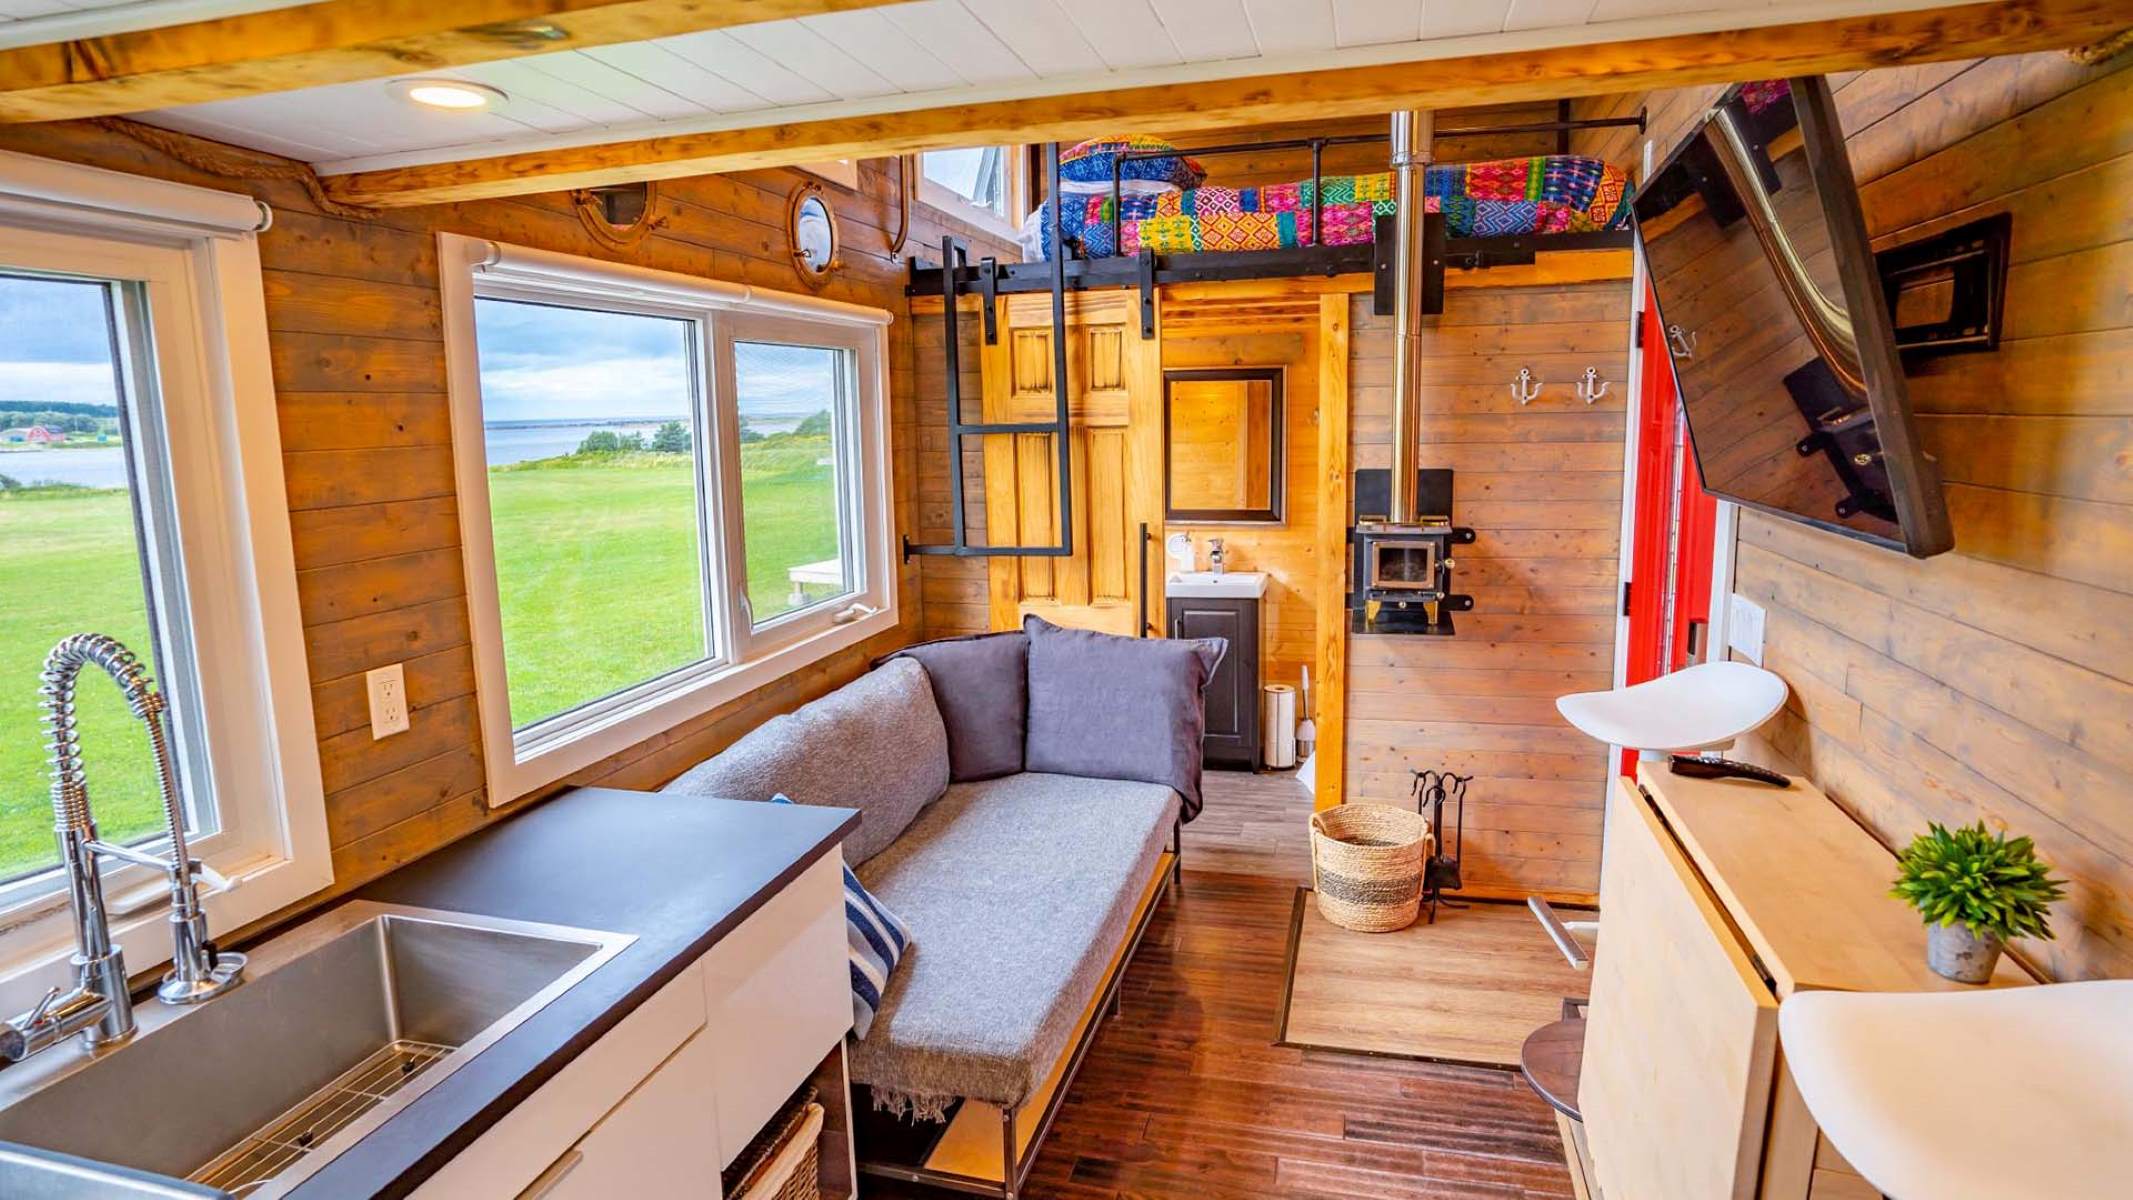 How To Design Your Own Tiny House